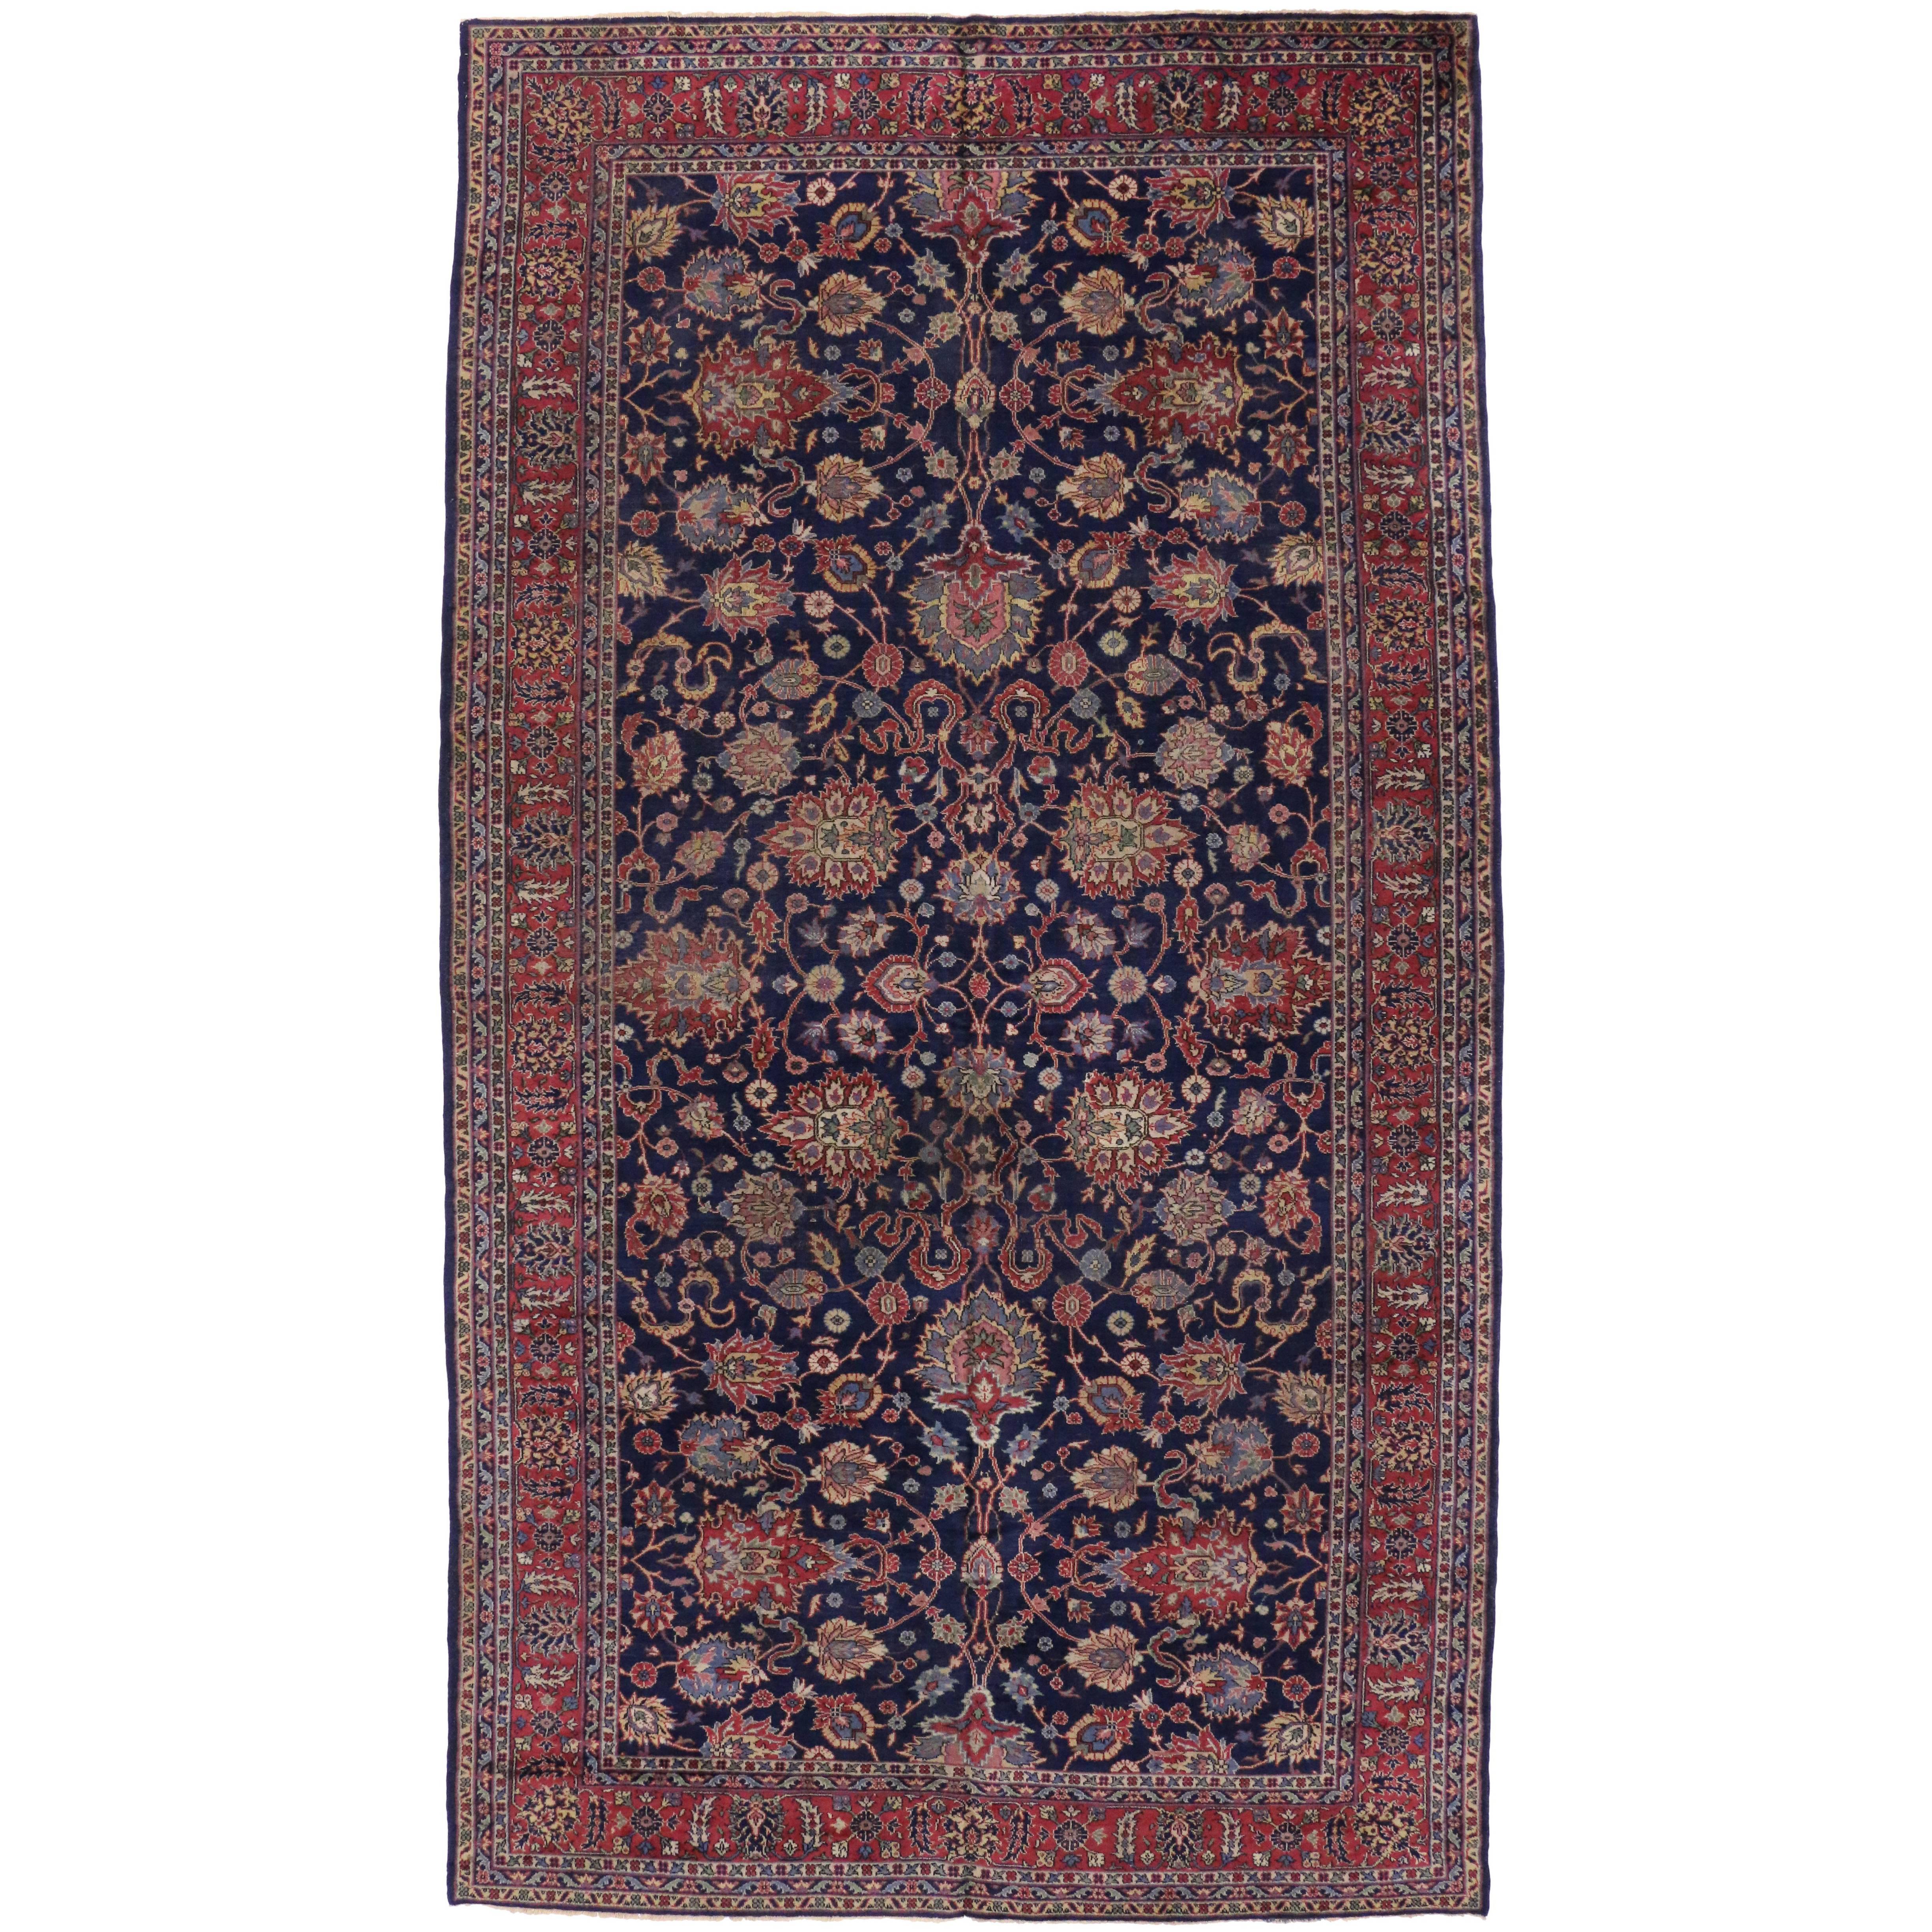 Antique Turkish Blue Sparta Gallery Rug with Old World French Chateau Style 